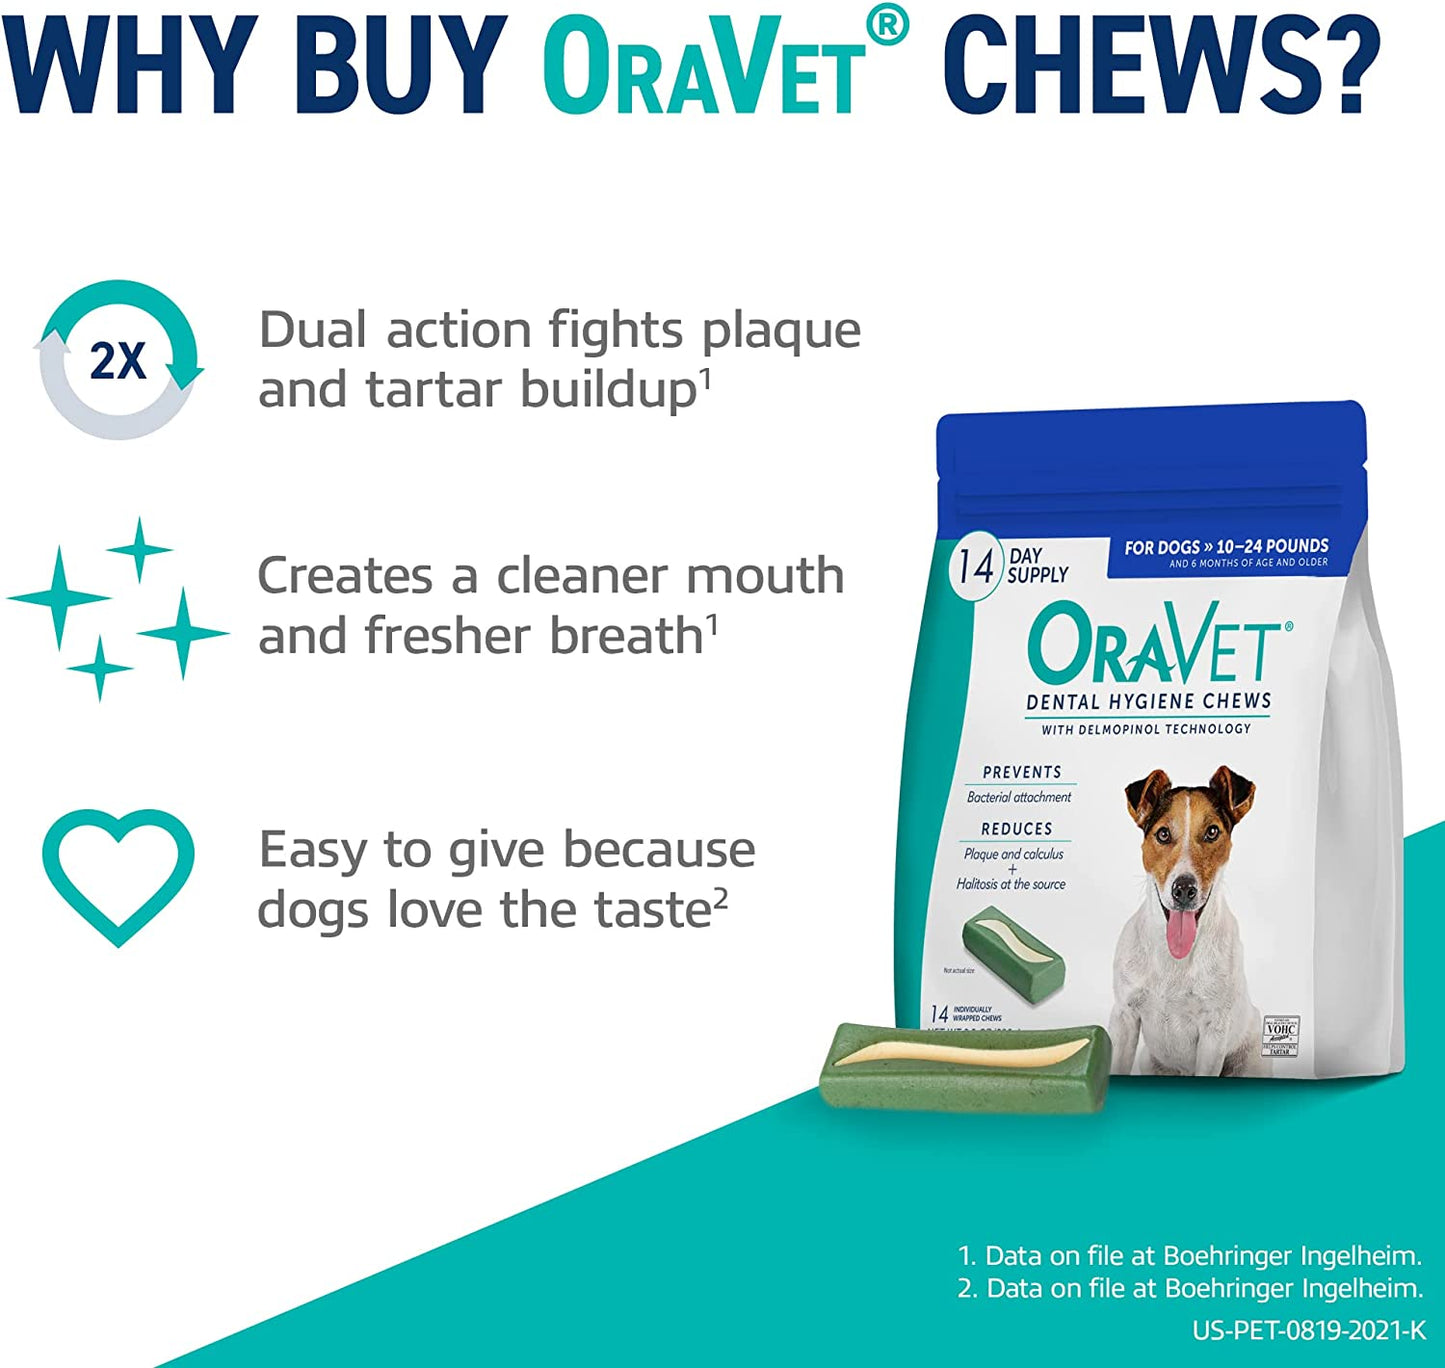 ORAVET Dental Chews for Dogs, Oral Care and Hygiene Chews (Small Dogs, 10-24 Lbs.) Blue Pouch, 14 Count